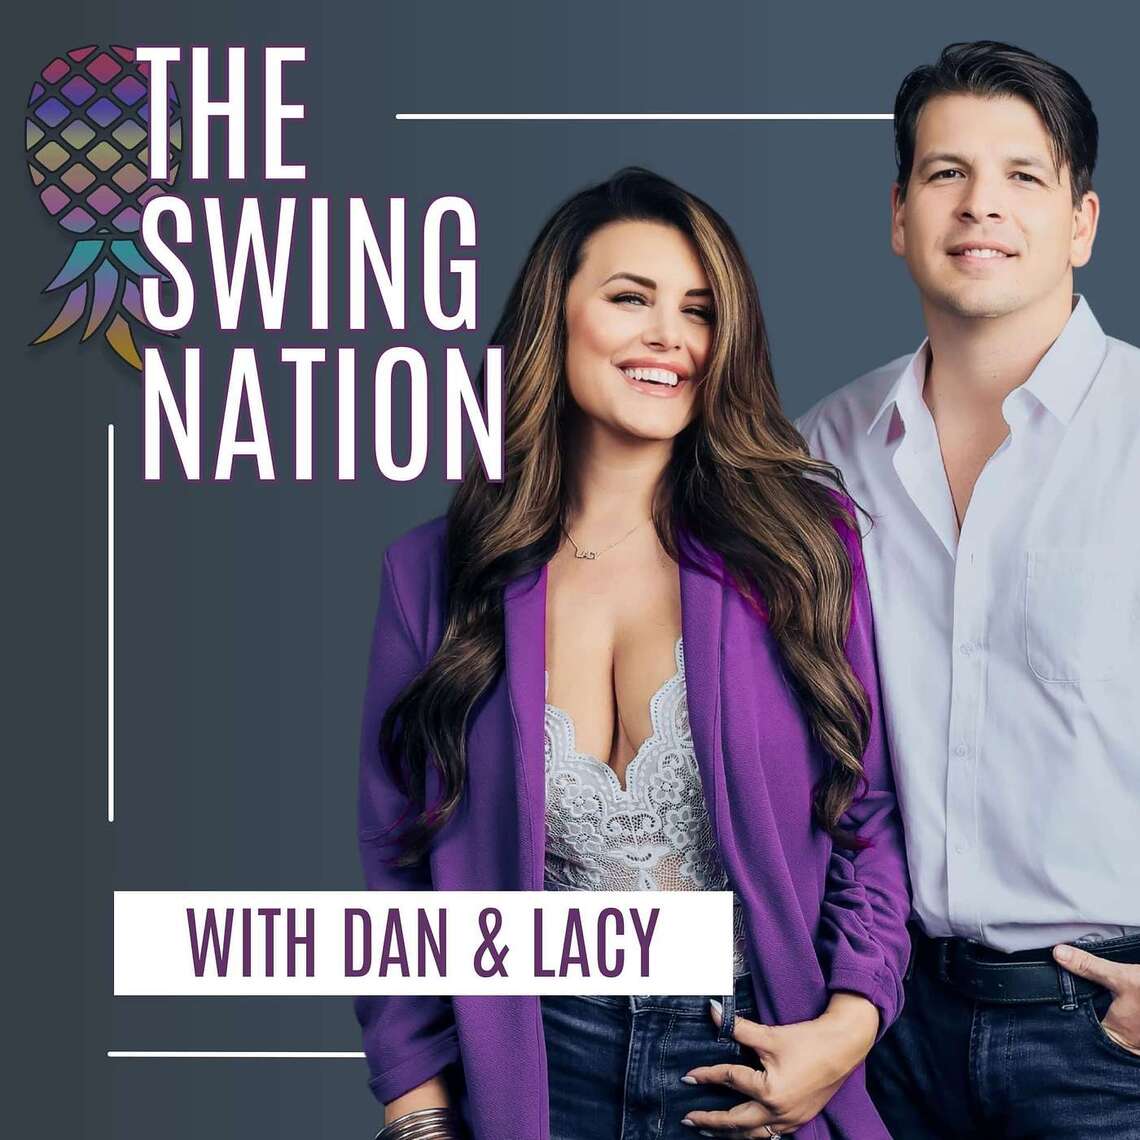 The Swing Nation - A Sex Positive Swingers image